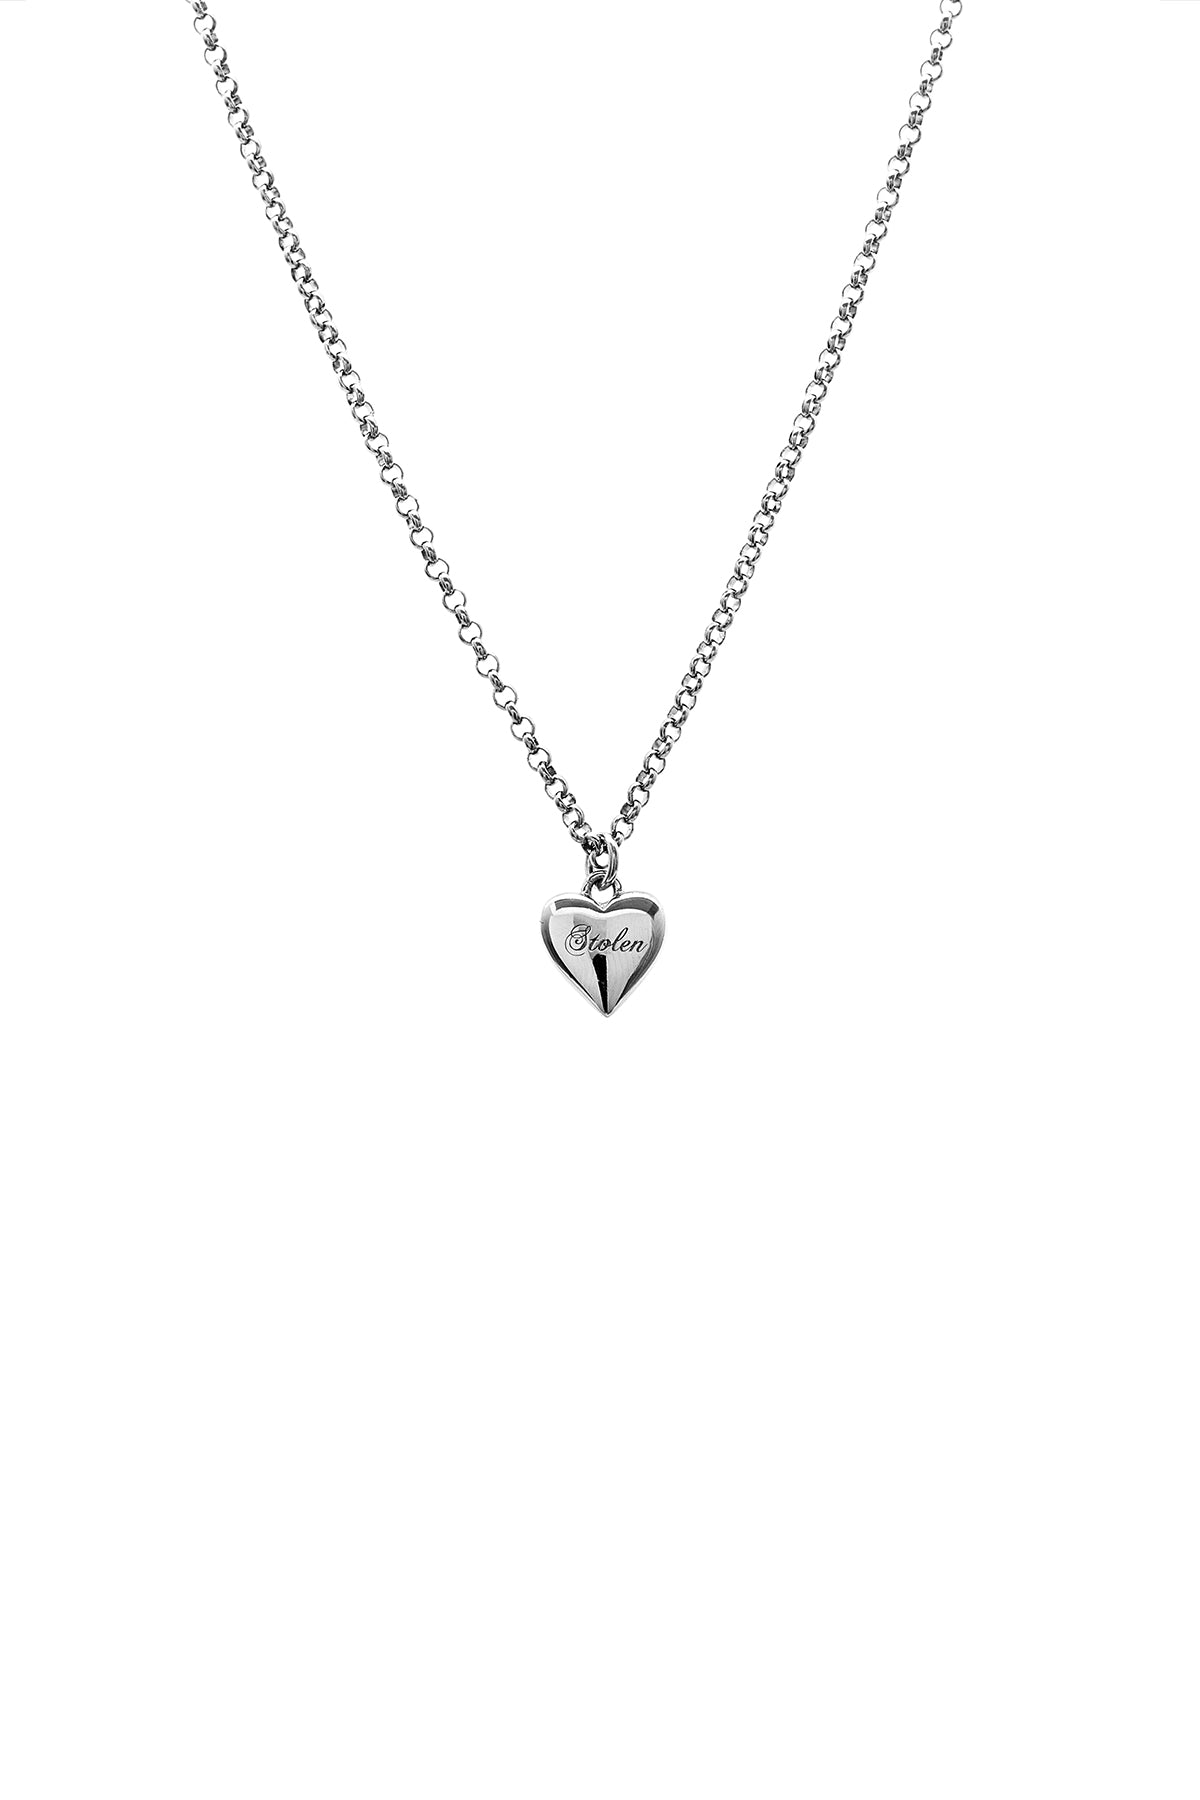 HEART IS FULL NECKLACE MINI